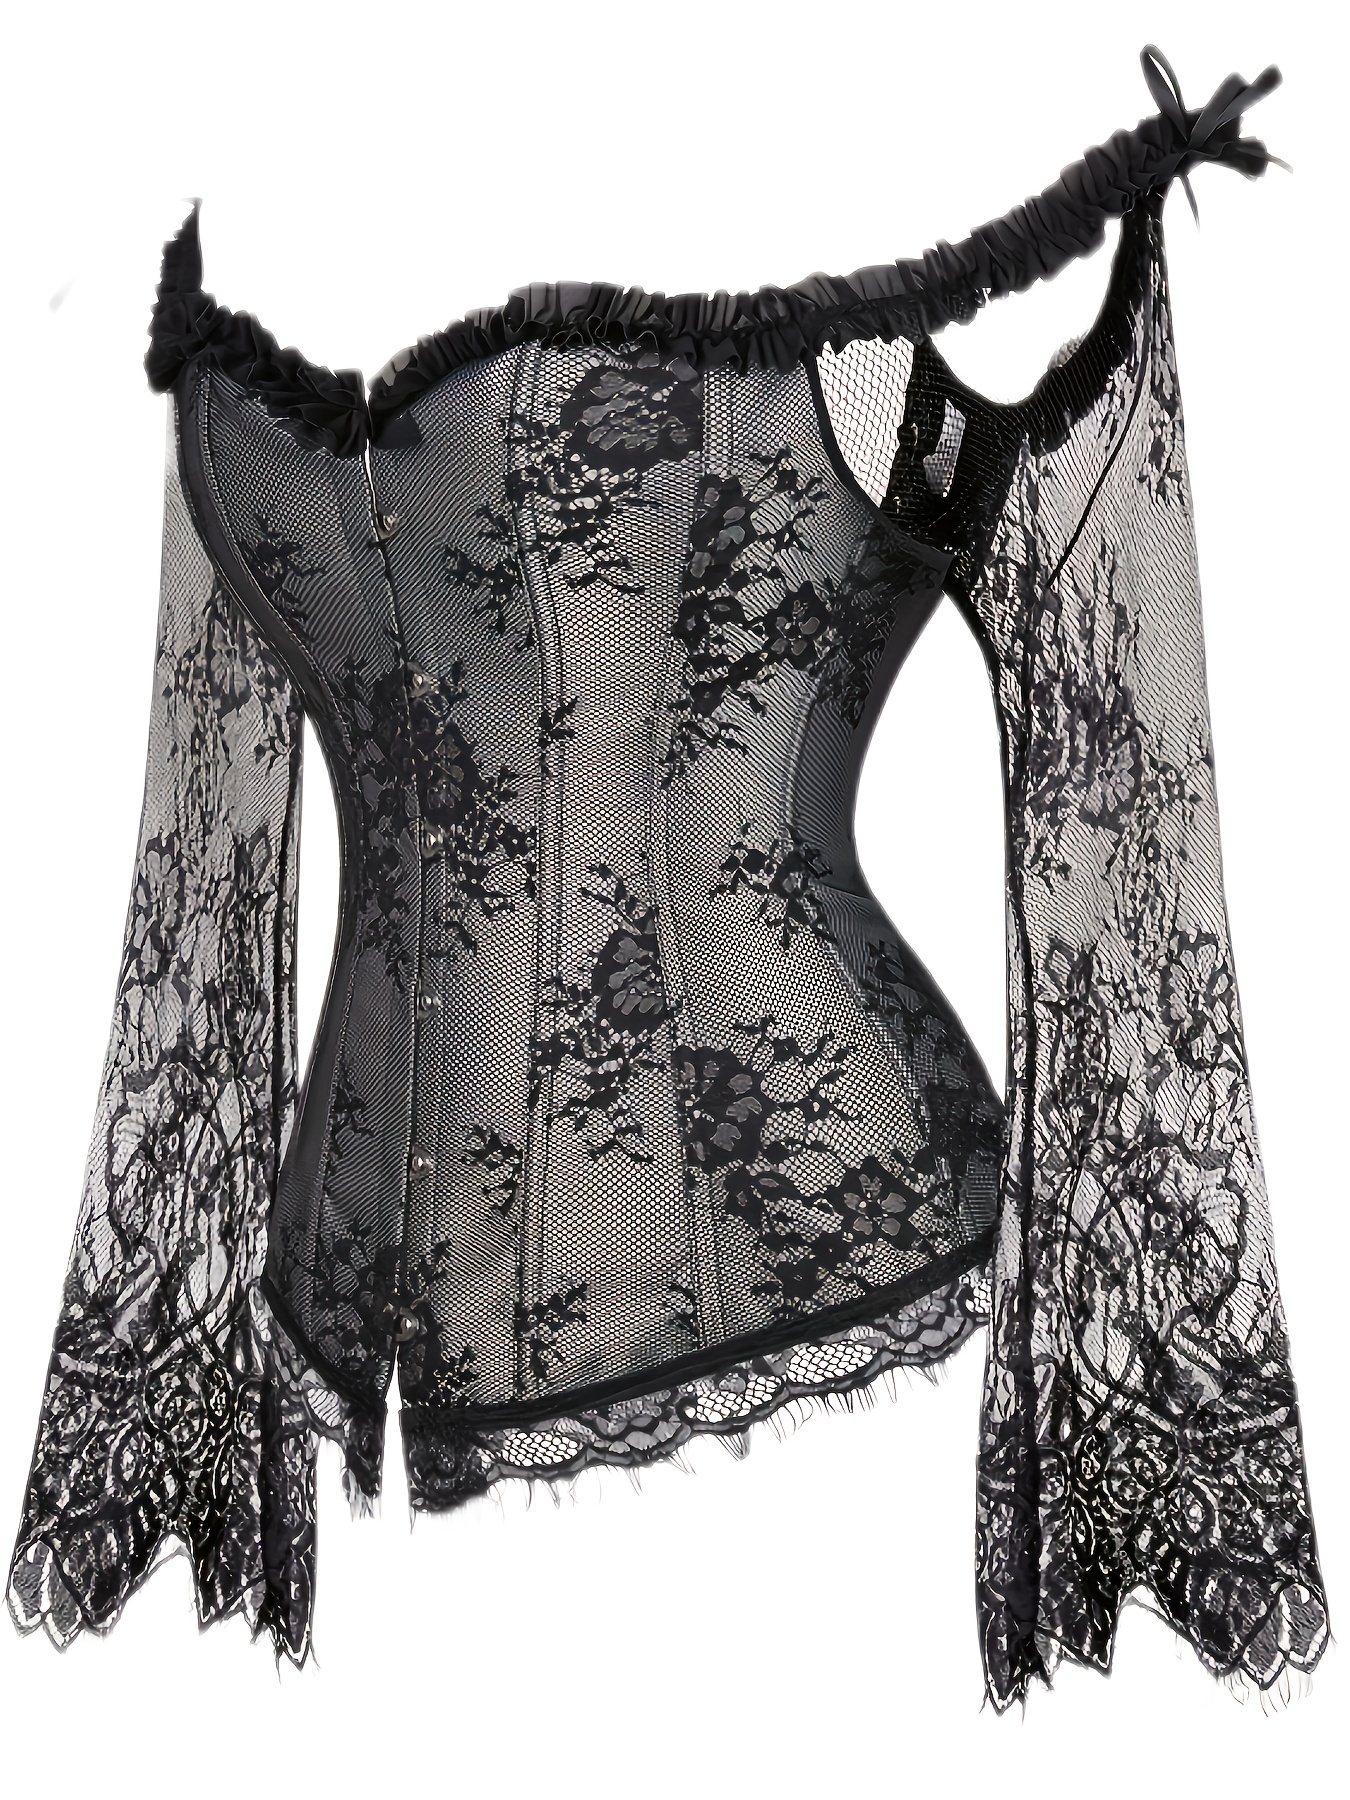 Ladies, Check Out These Beautiful And Trending Black Corset Lace